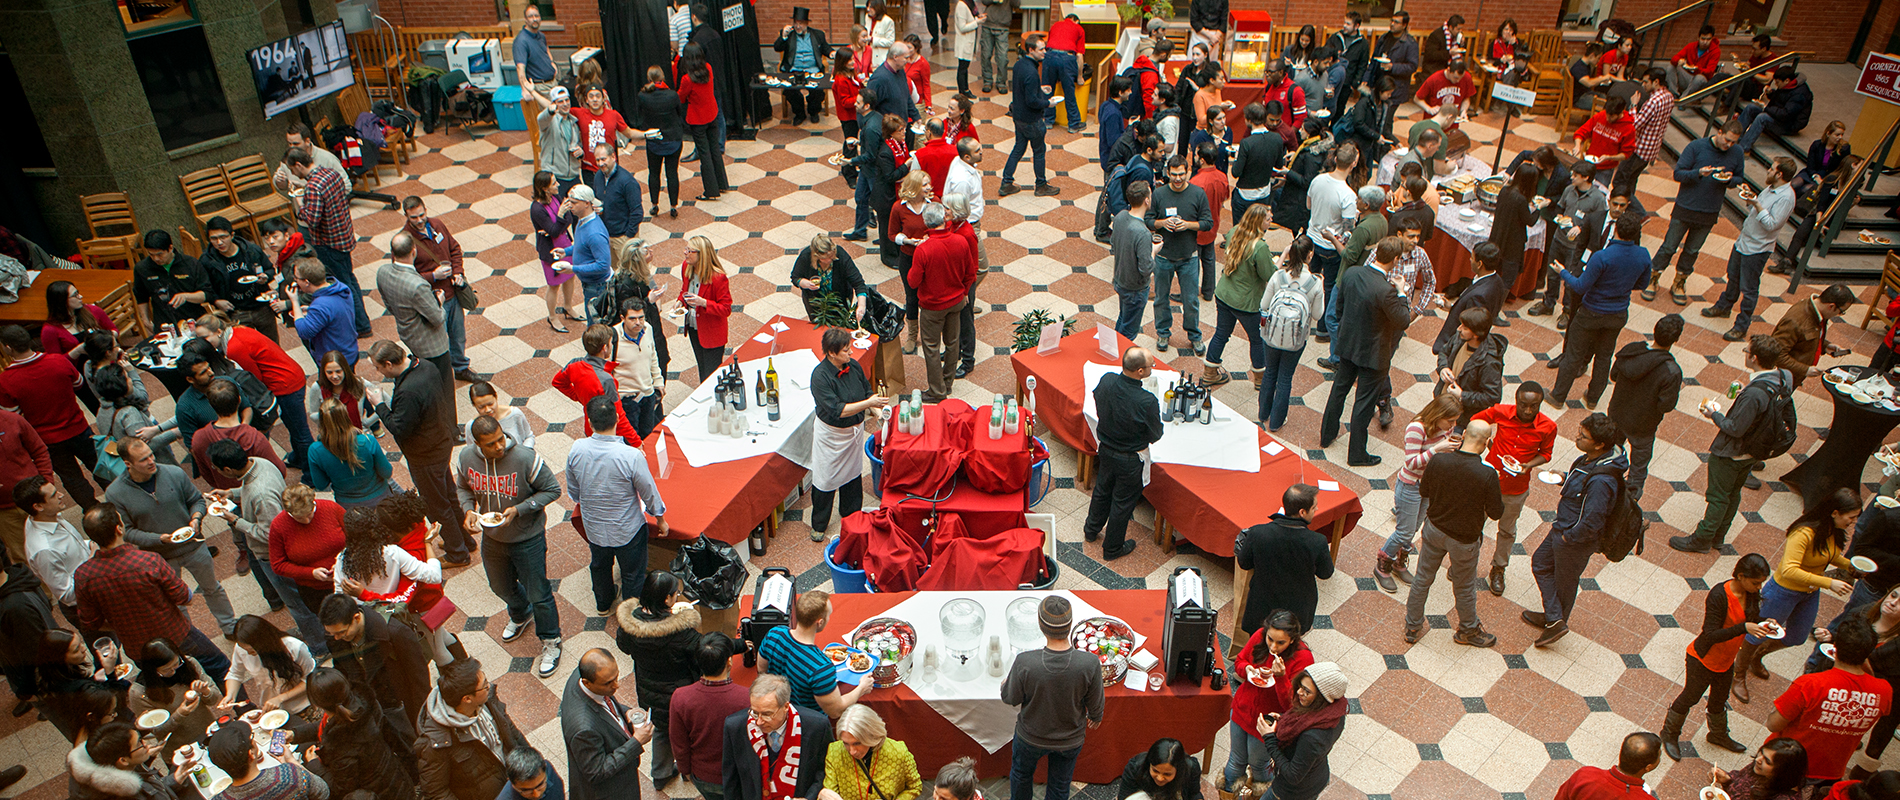 Aerial view of students in the Sage Atrium for an event.